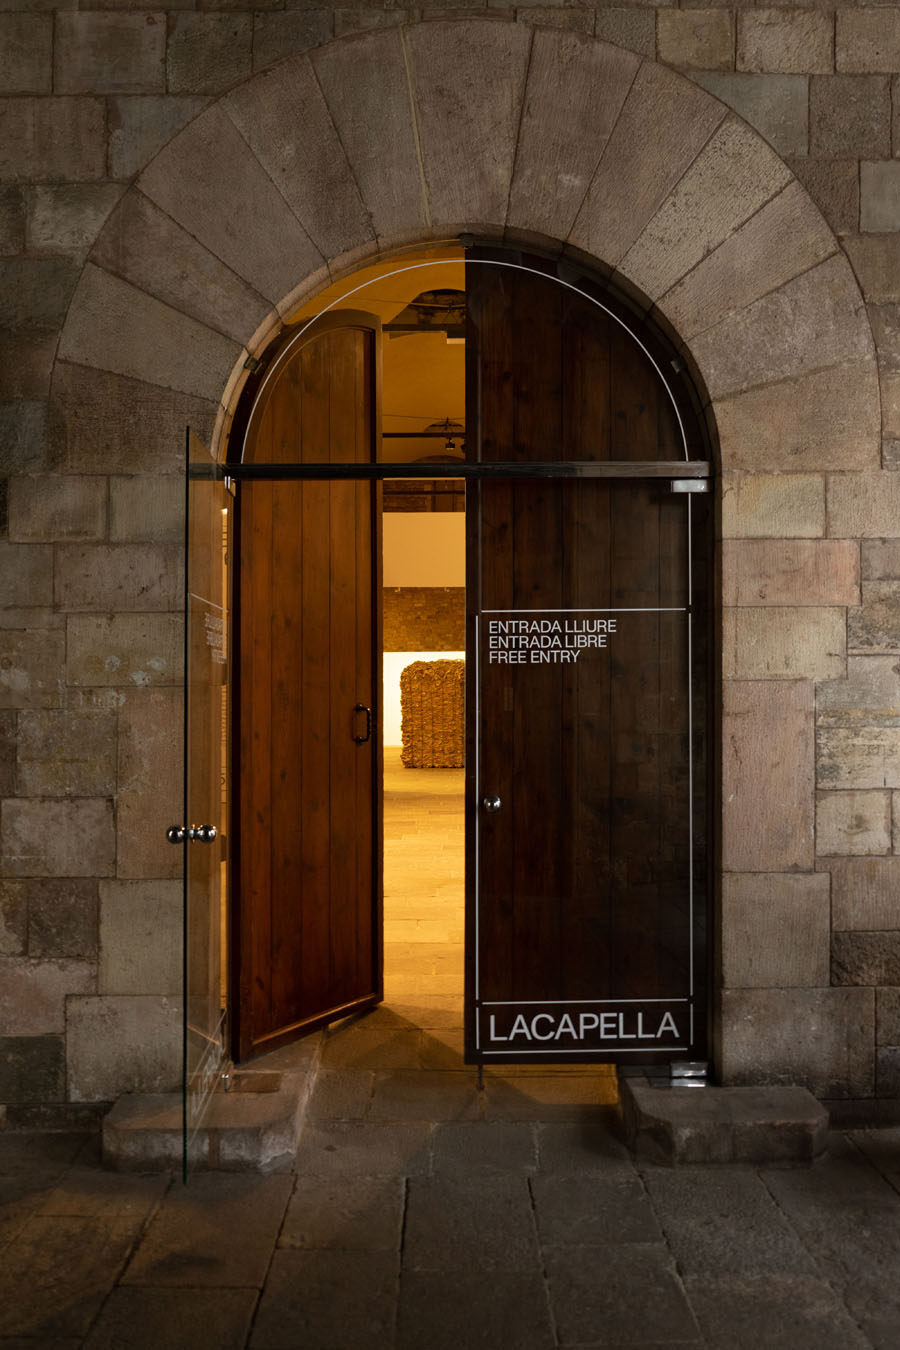 LACAPELLA – defining a new exhibition space | FOLCH